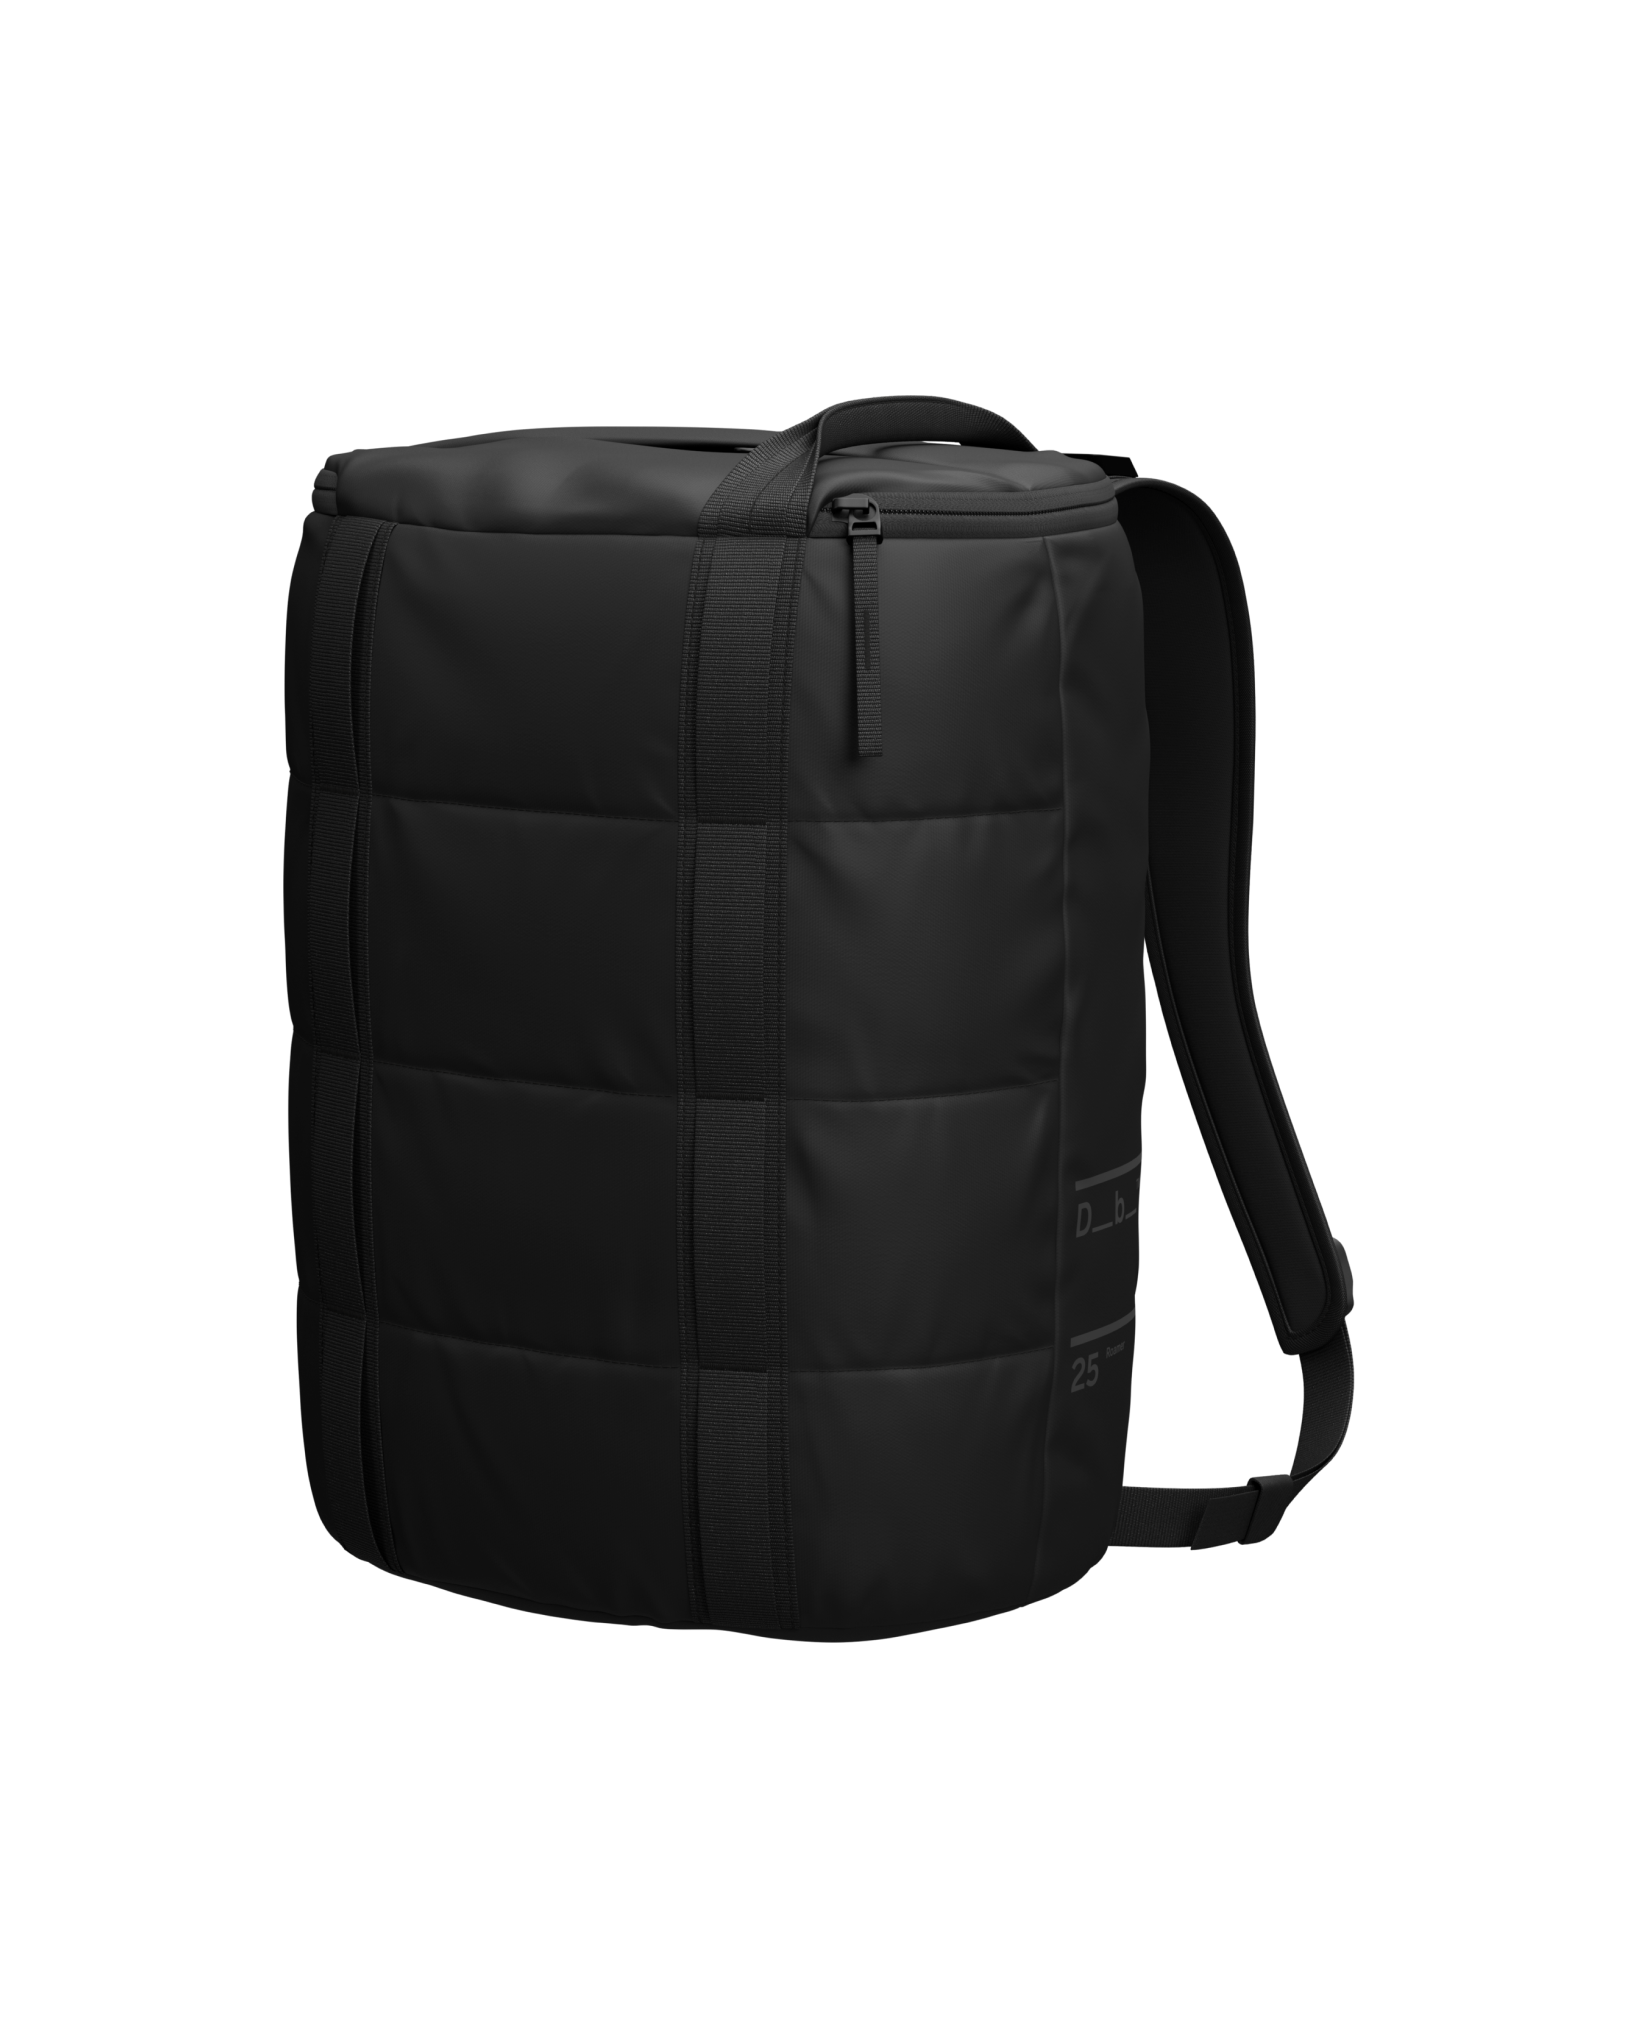 Roamer Duffel Backpack 25L Black Out Black Out